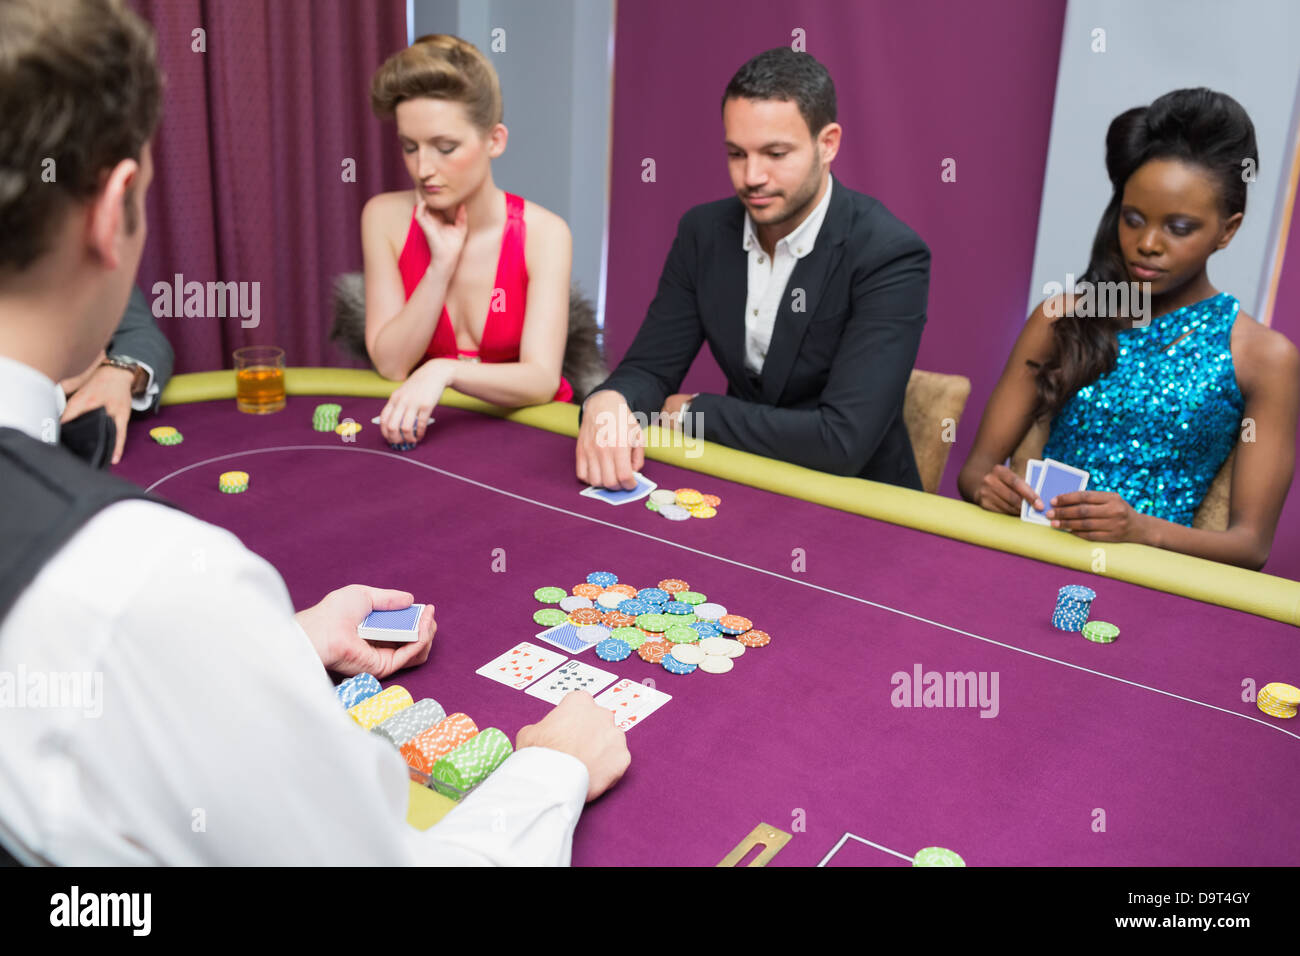 Man and two women playing poker Stock Photo